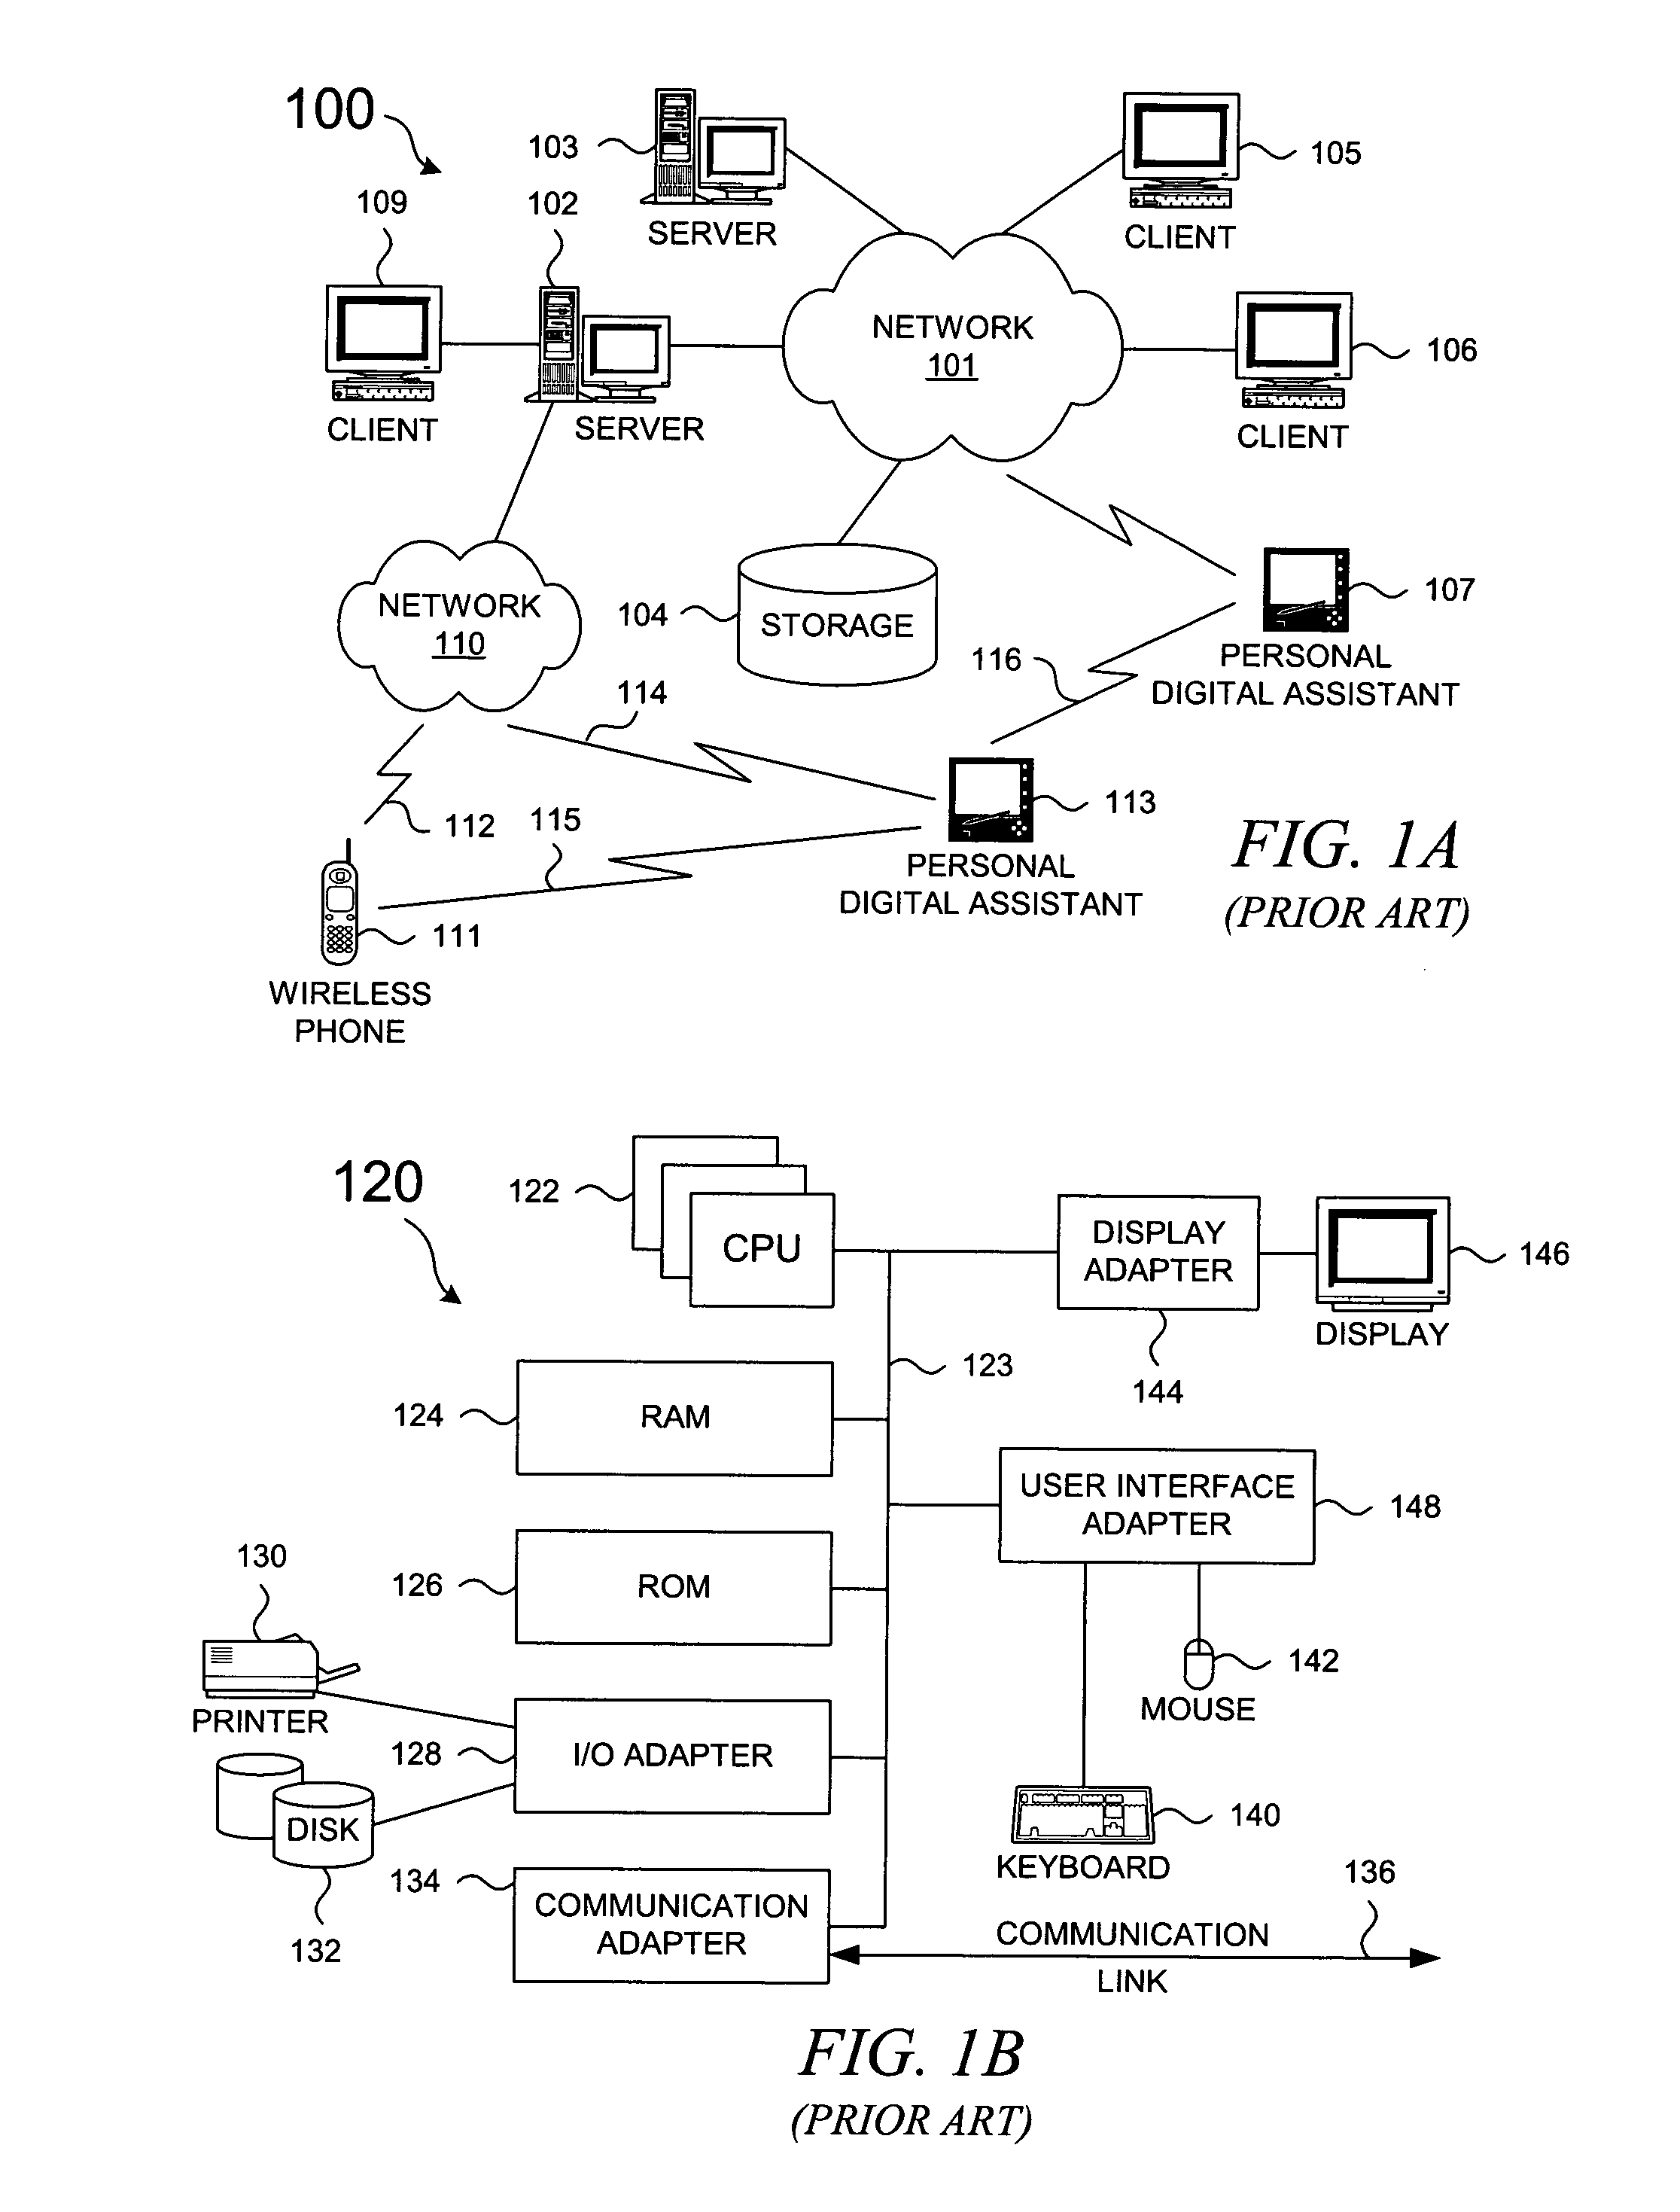 Method and system for automatic adjustment of entitlements in a distributed data processing environment